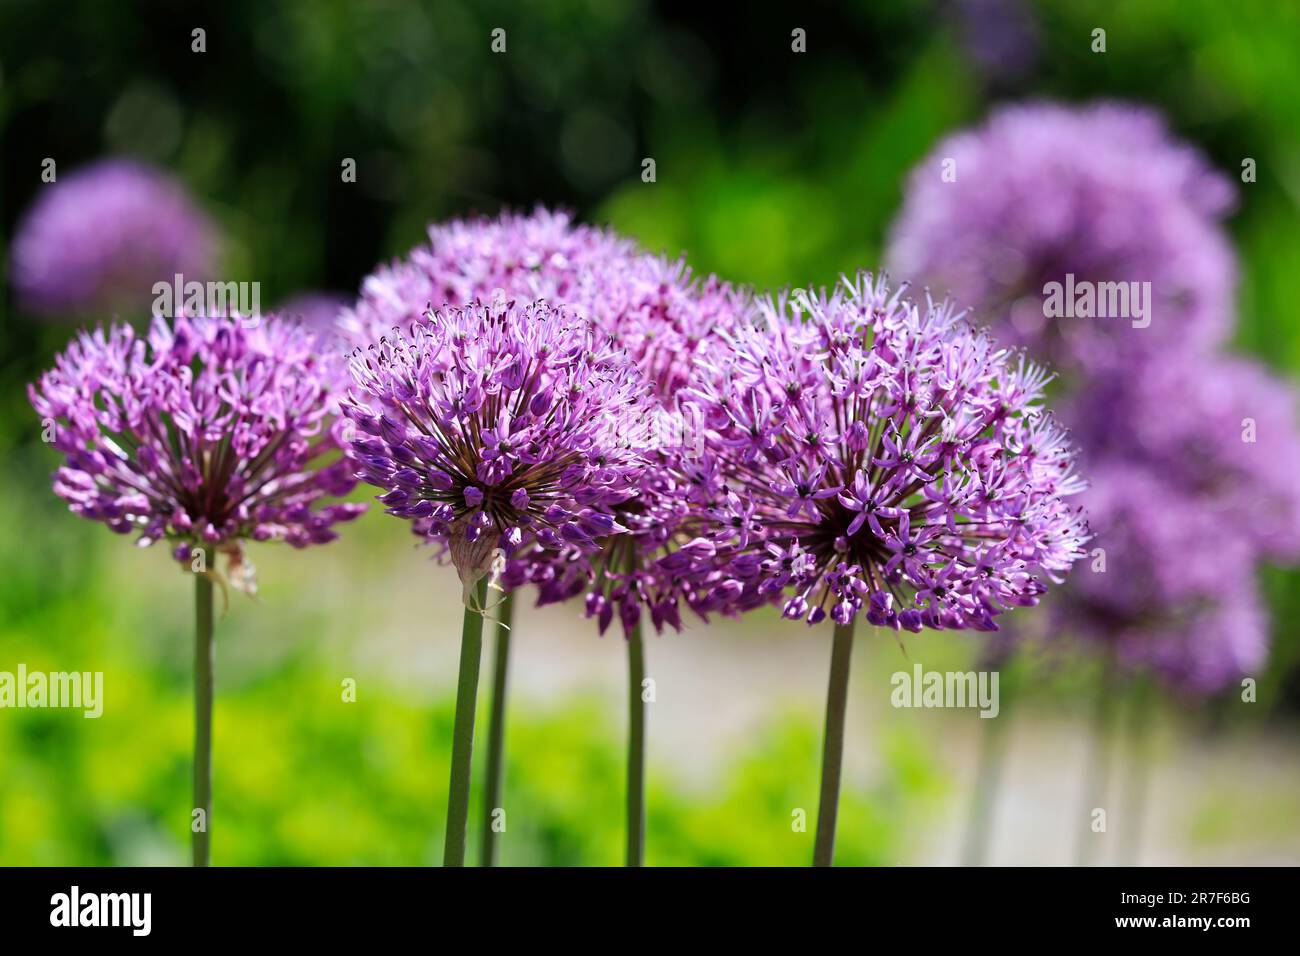 Flowers of purple Allium in the garden, seen close up. The ornamental, perennial plant is an Asian species of onion. Stock Photo